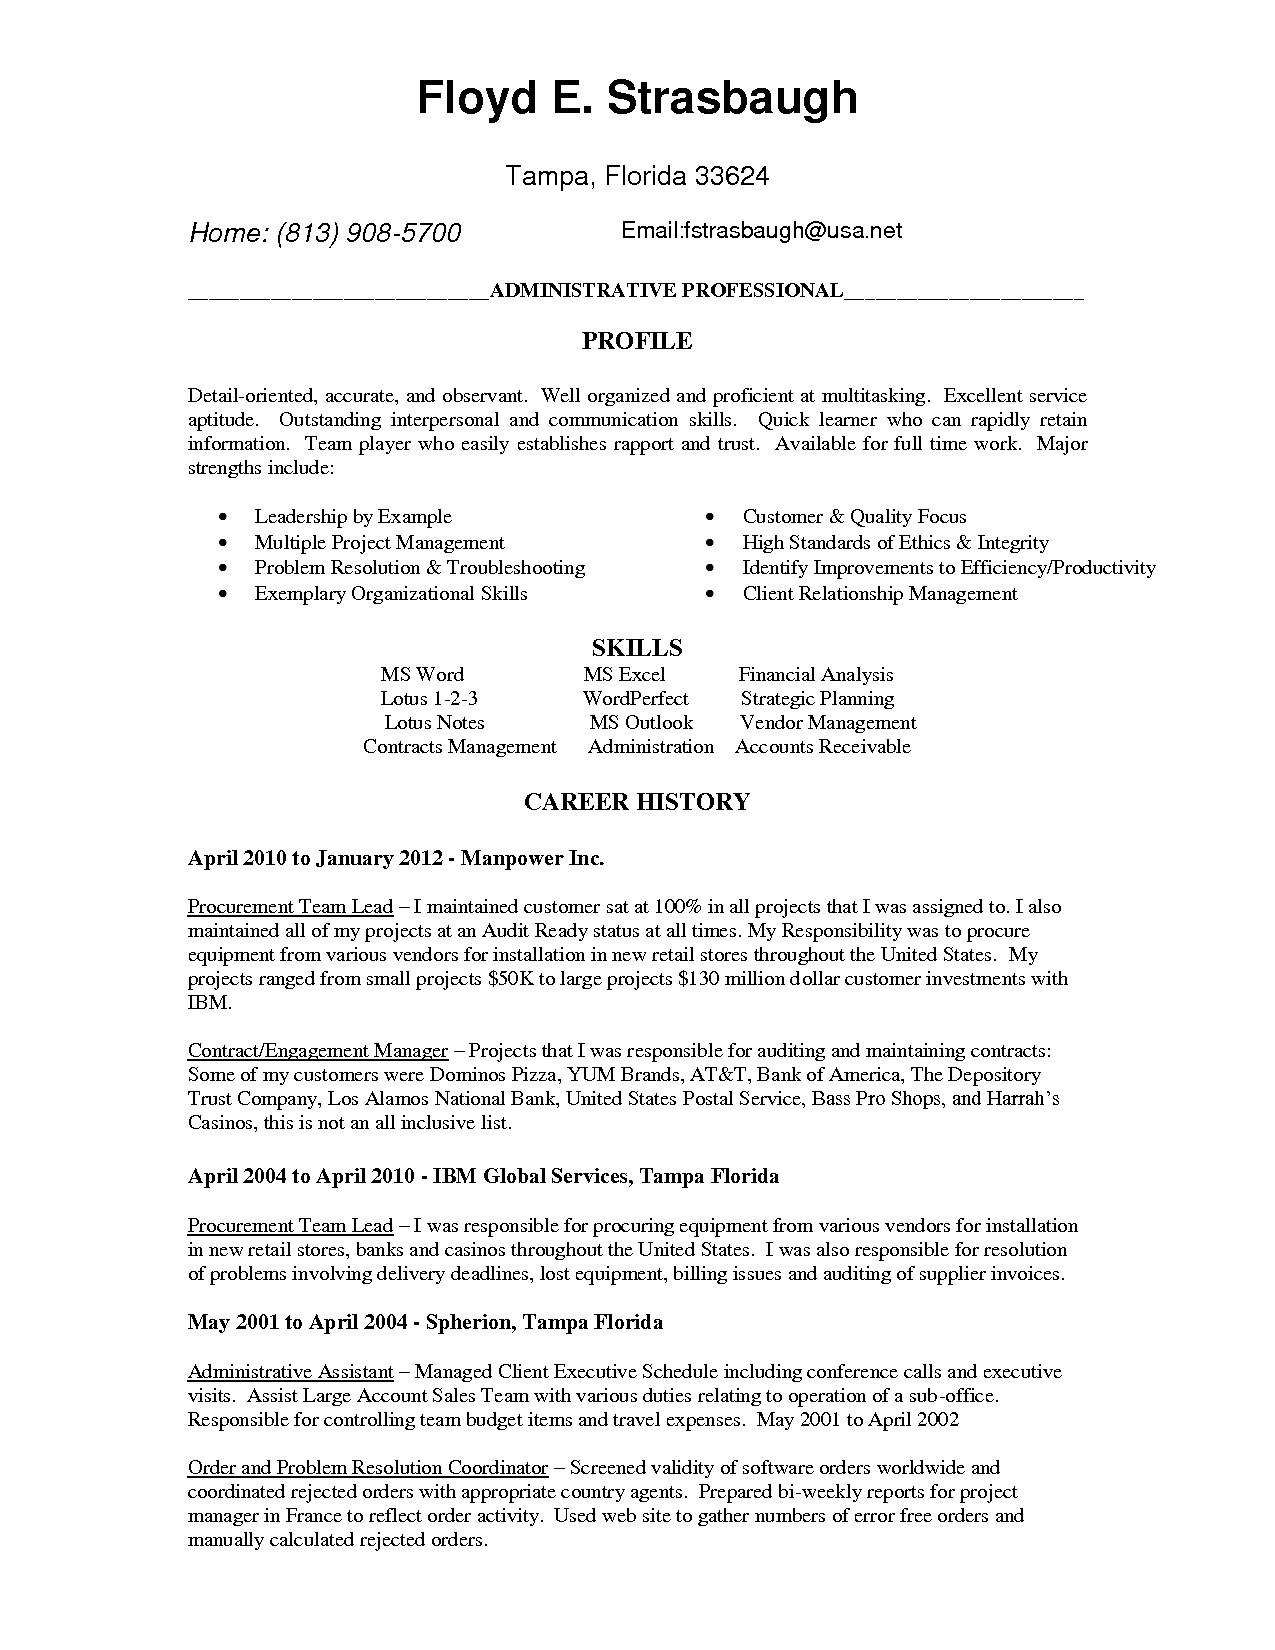 Sales Cover Letter Template - Sales Projection Template Free Download